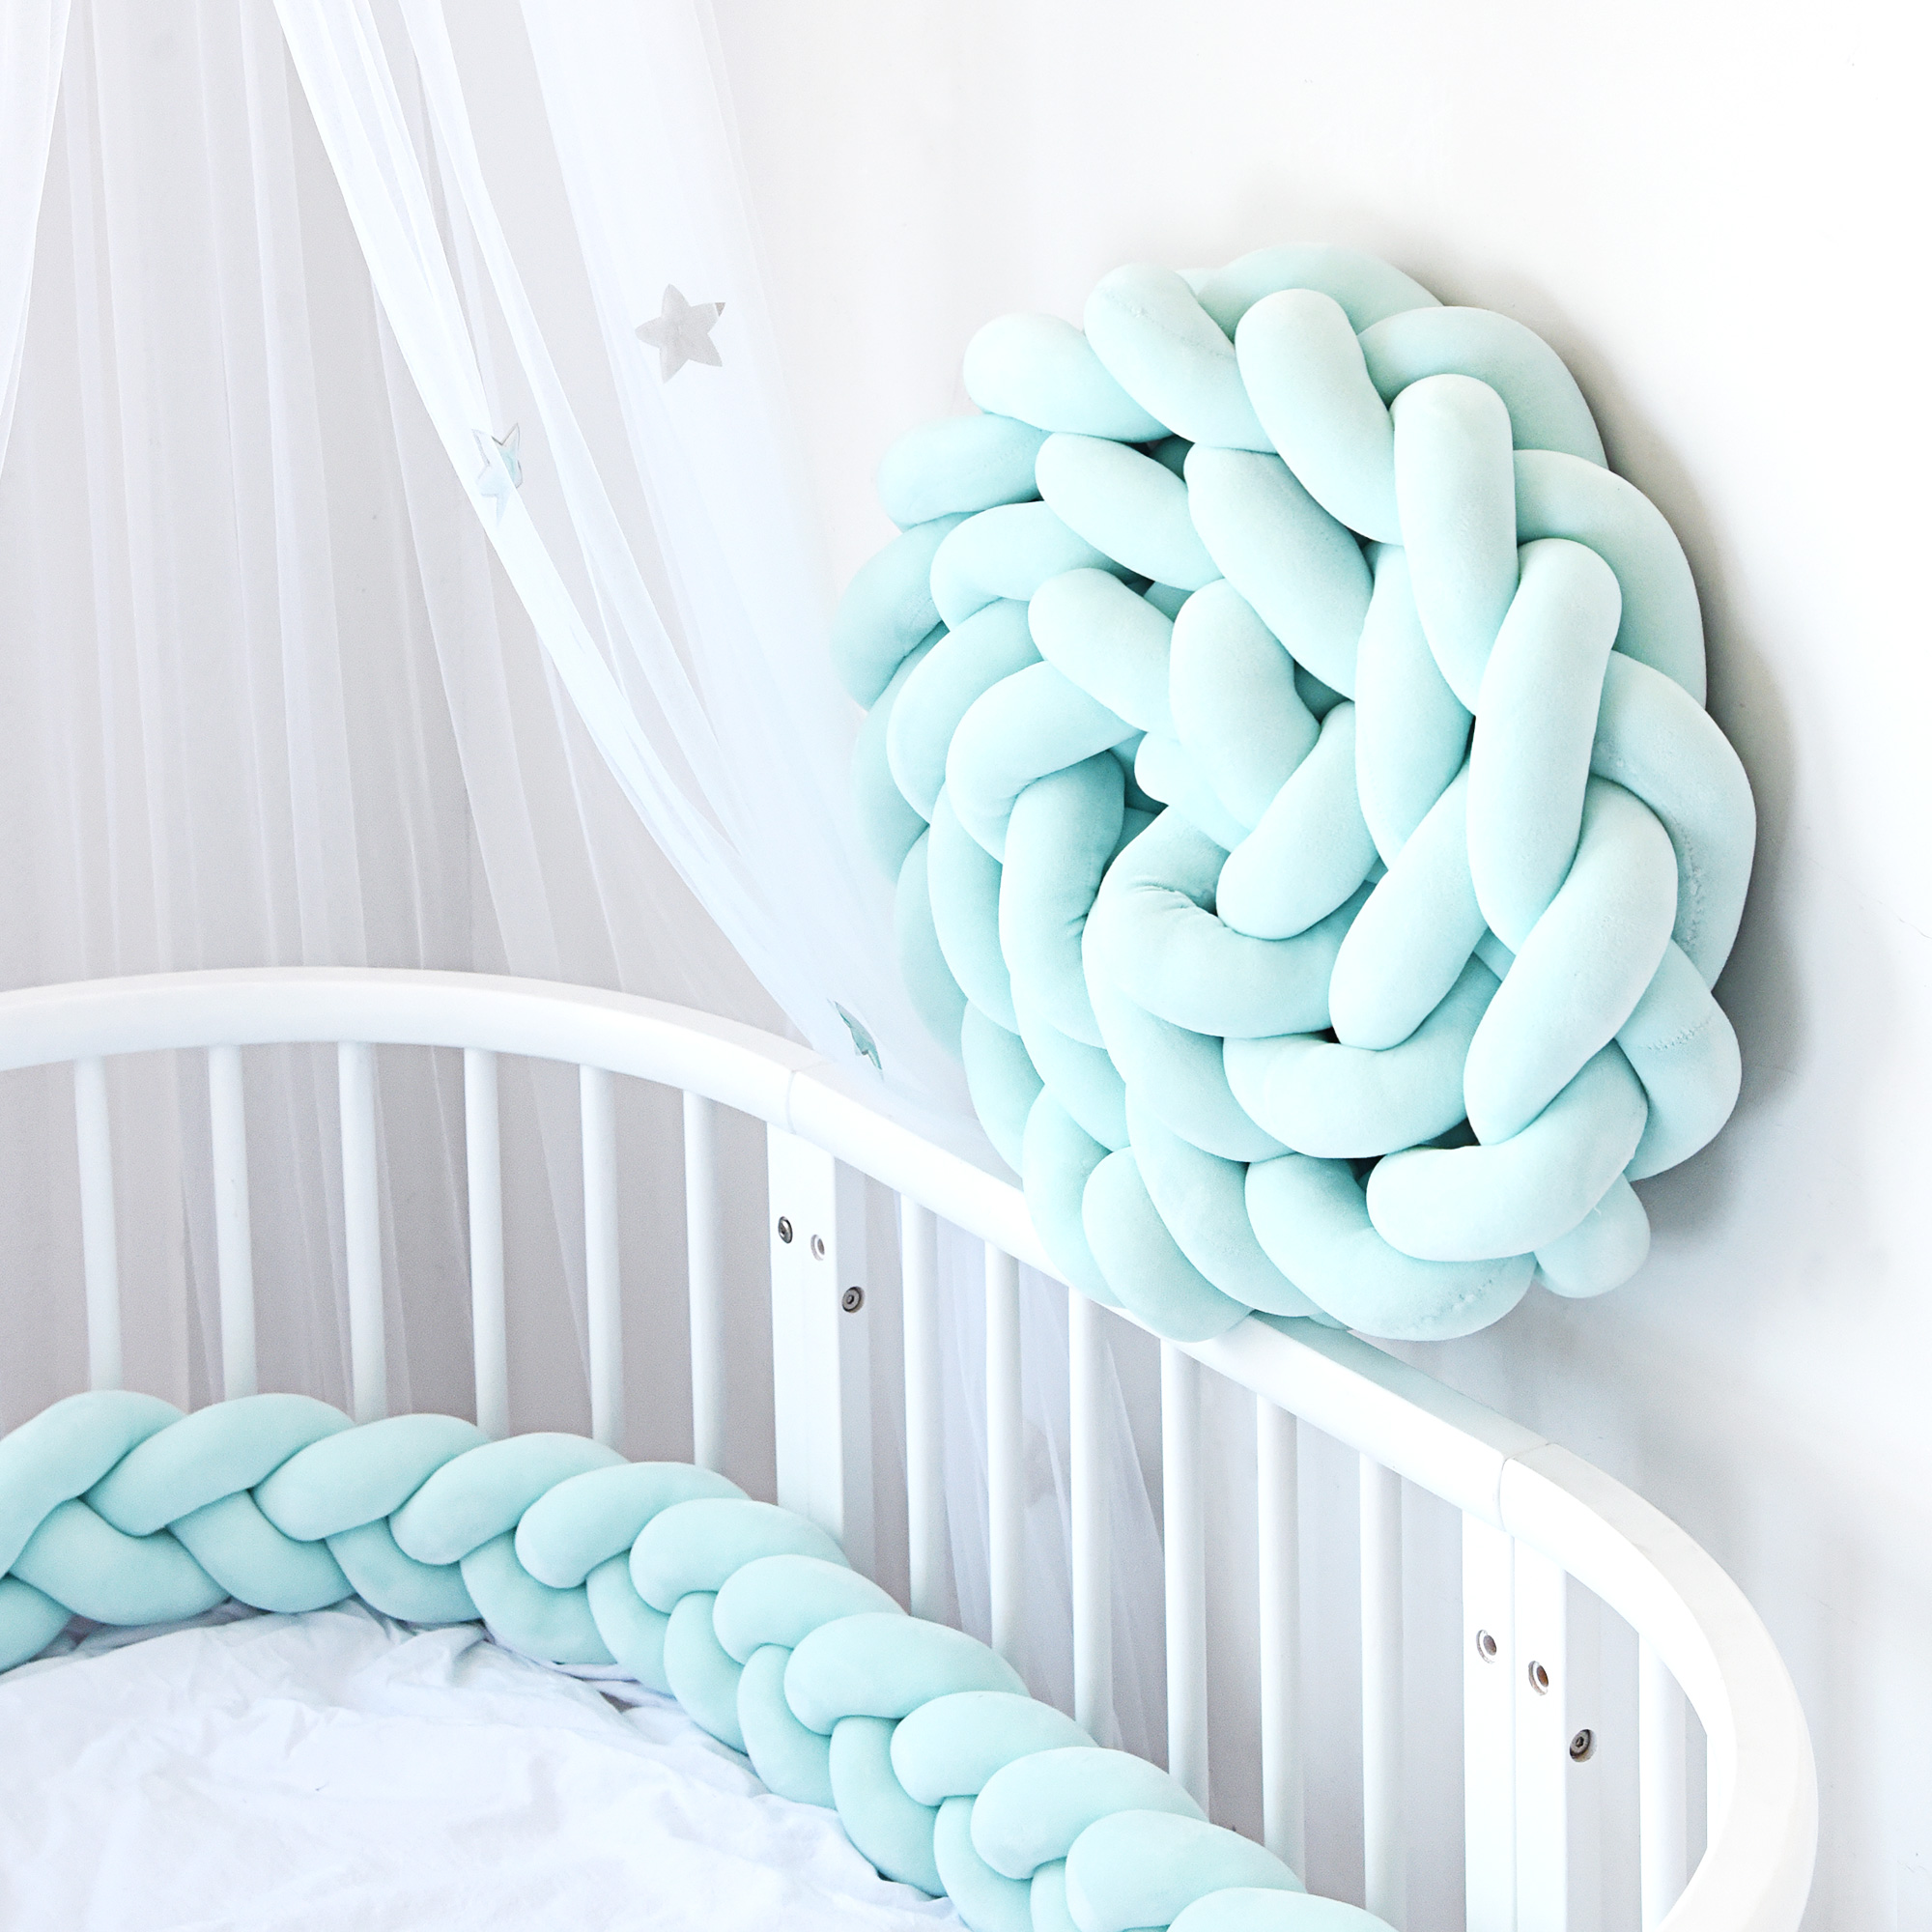 Baby Plush 2 Meters 3 Braiders Crib Cot Bed Bedding Cot Braided Yarn Knitted Handmade Crib Bumper Manufacturer